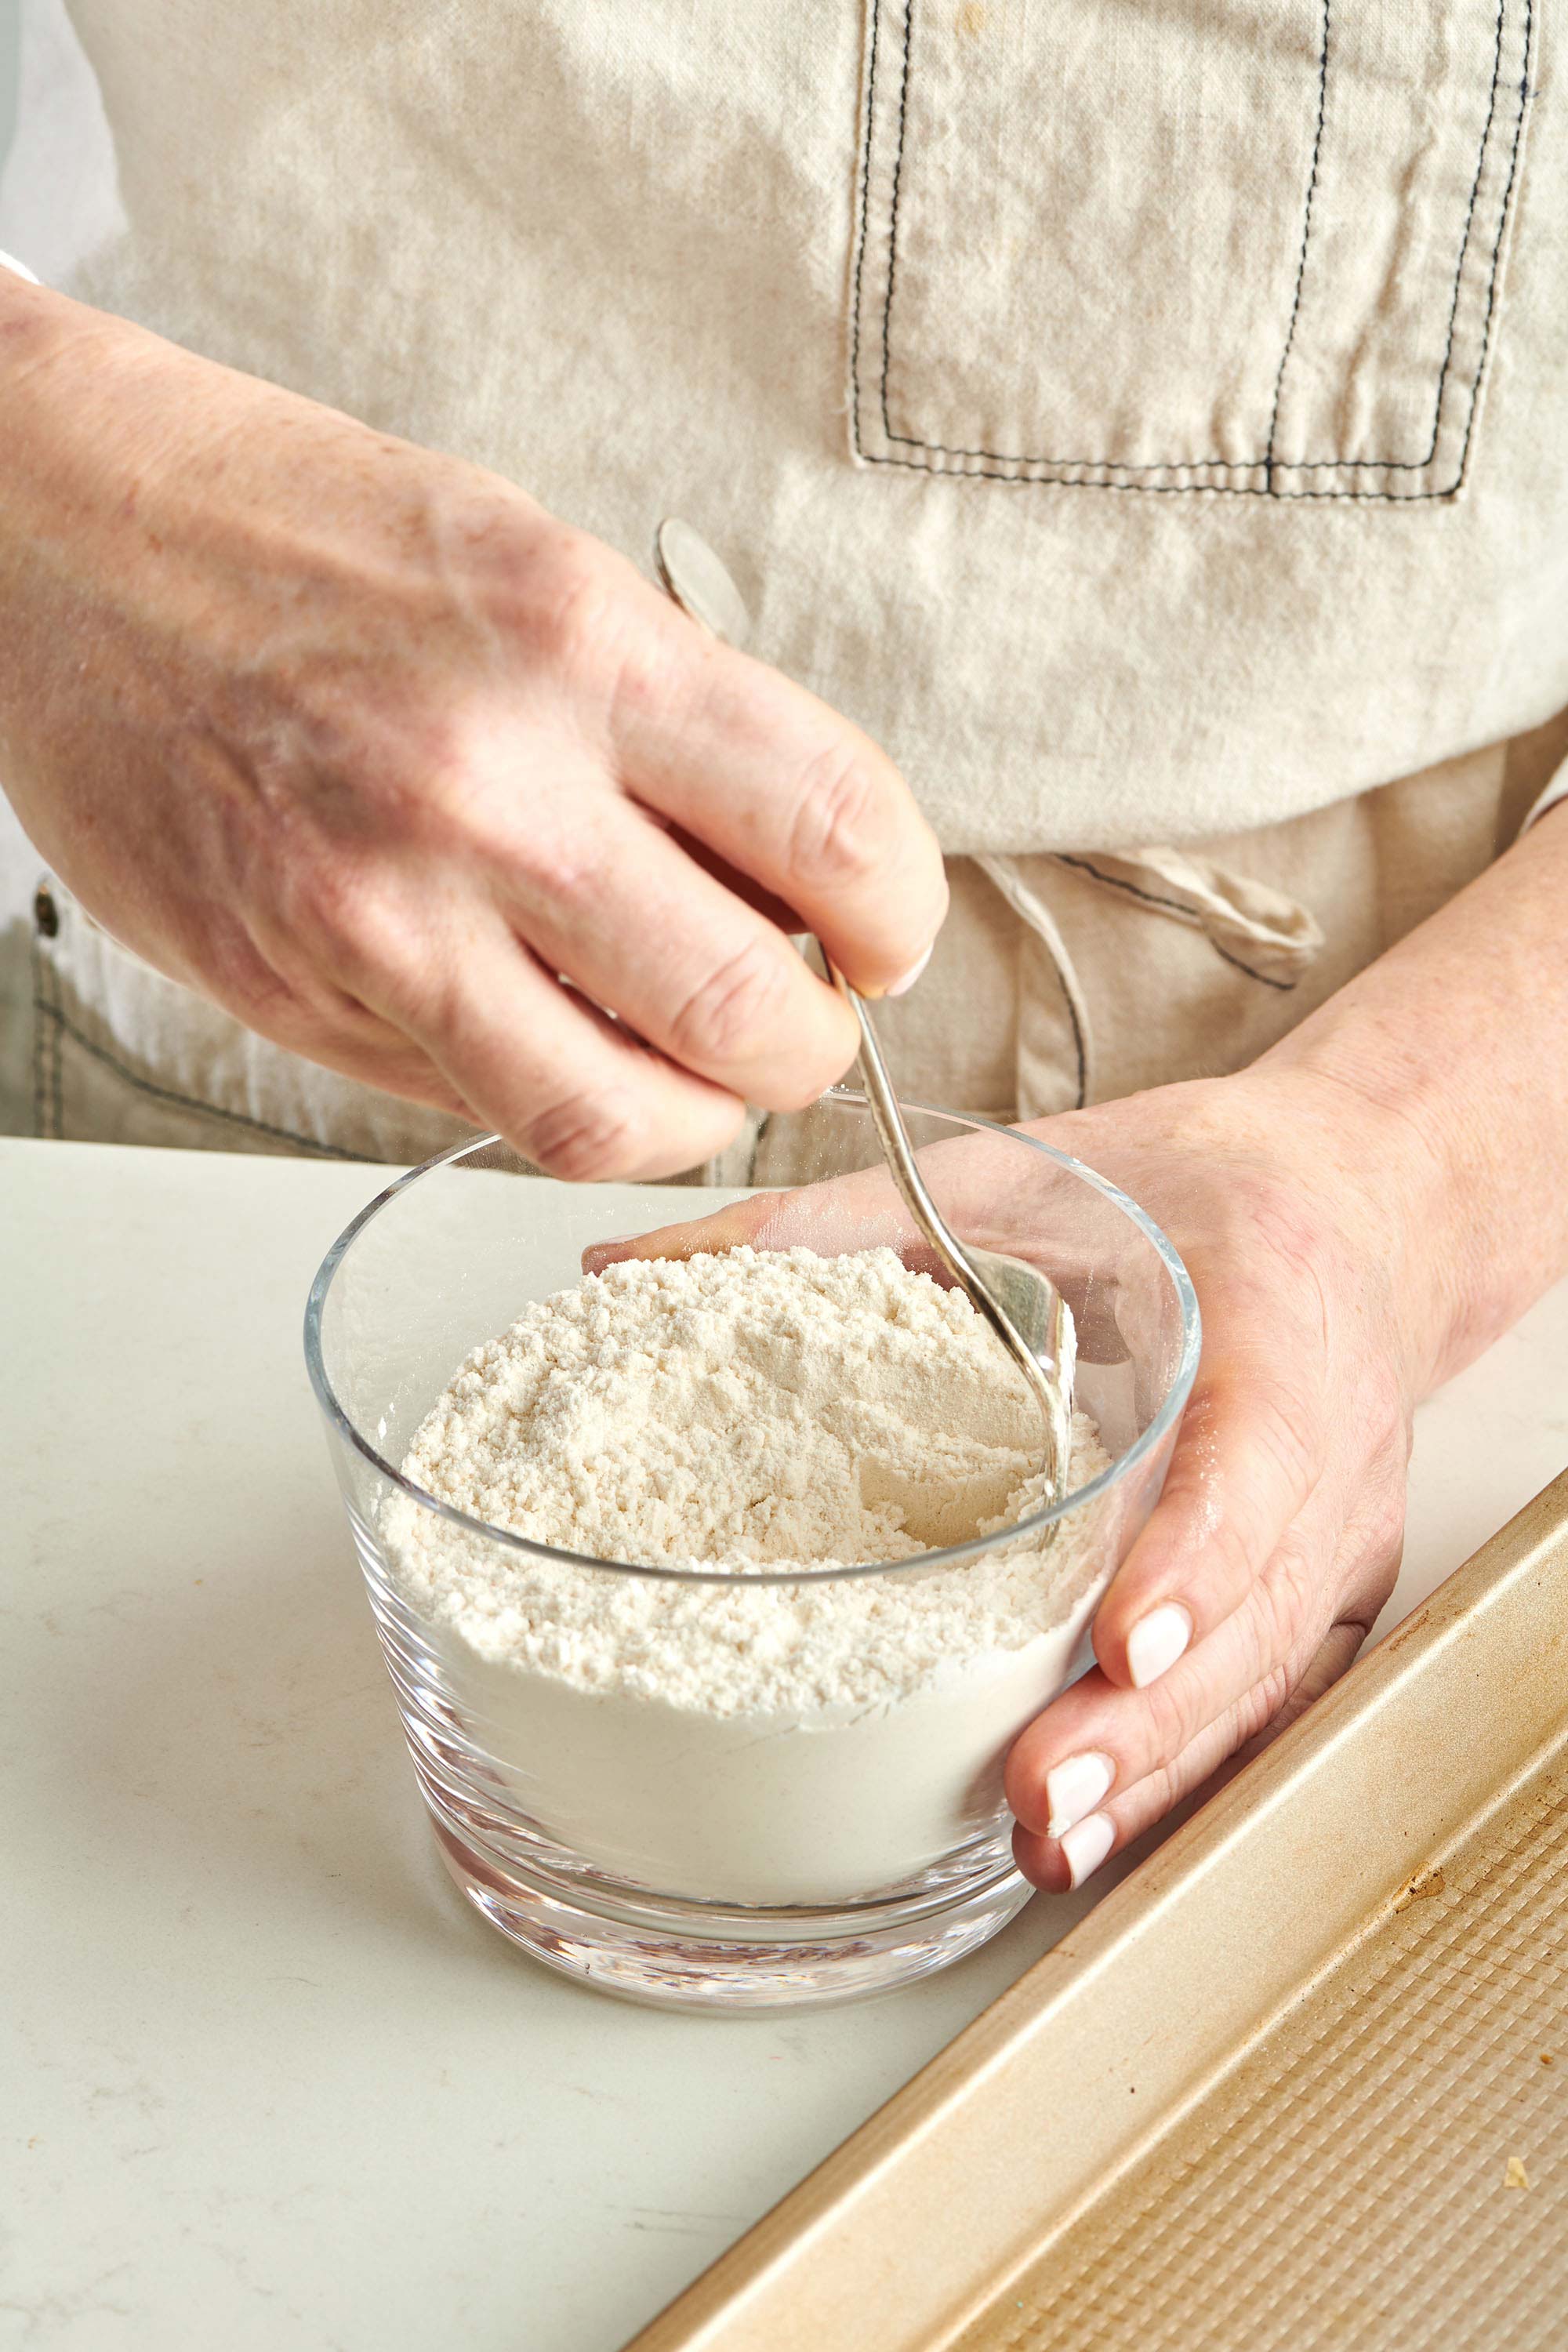 Woman stirring a small bowl of self-rising flour with a fork.